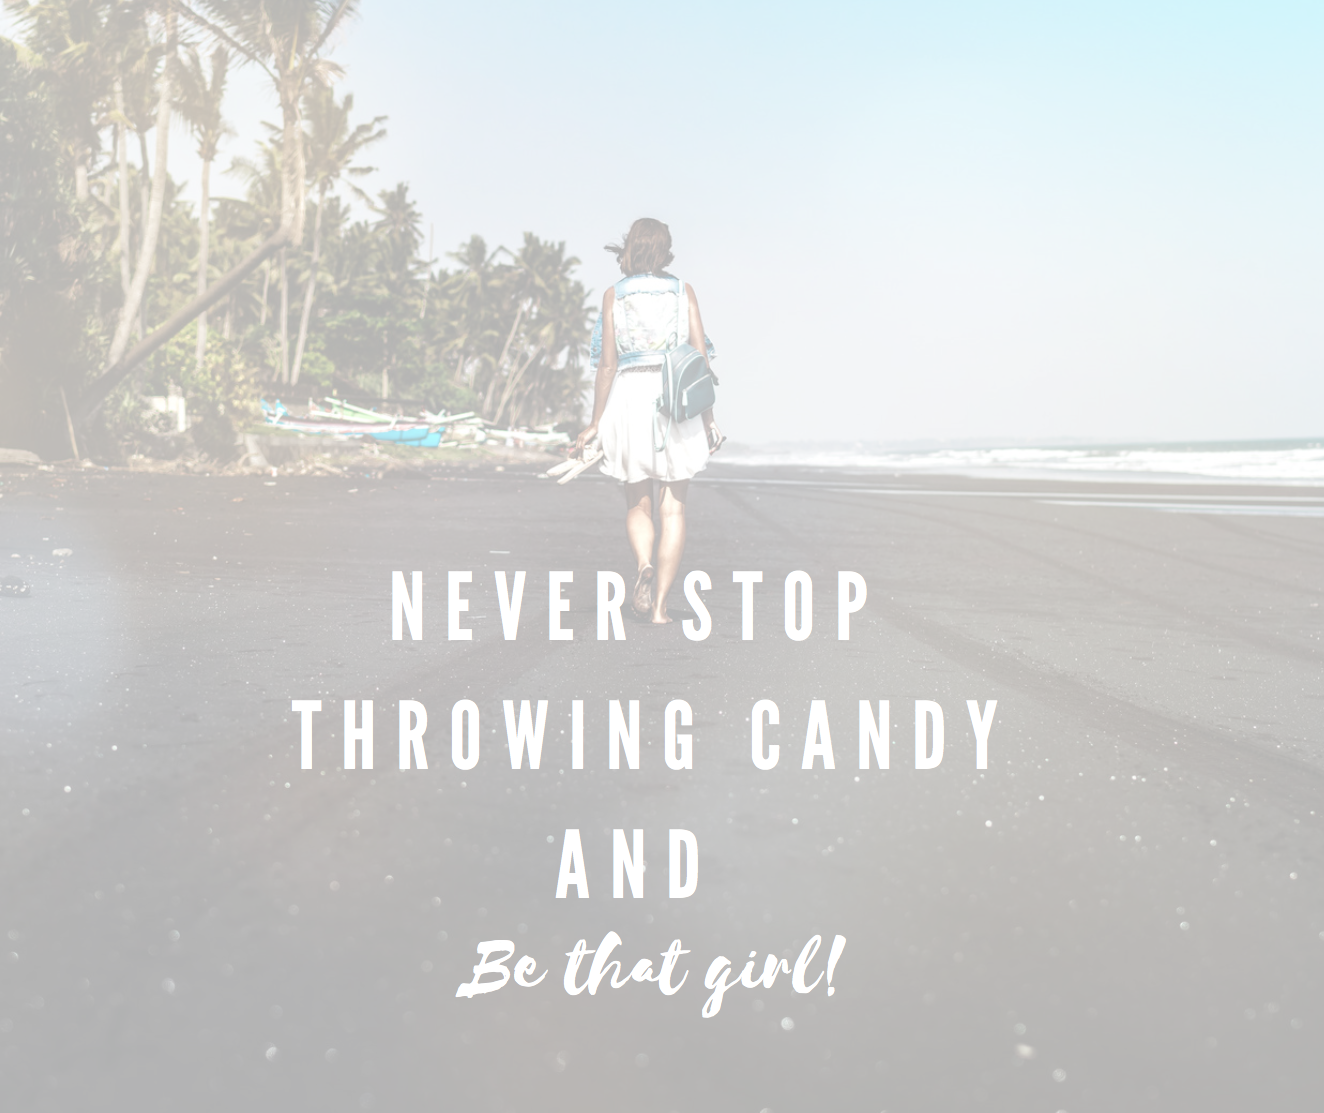 Never Stop Throwing Candy and Be that girl!